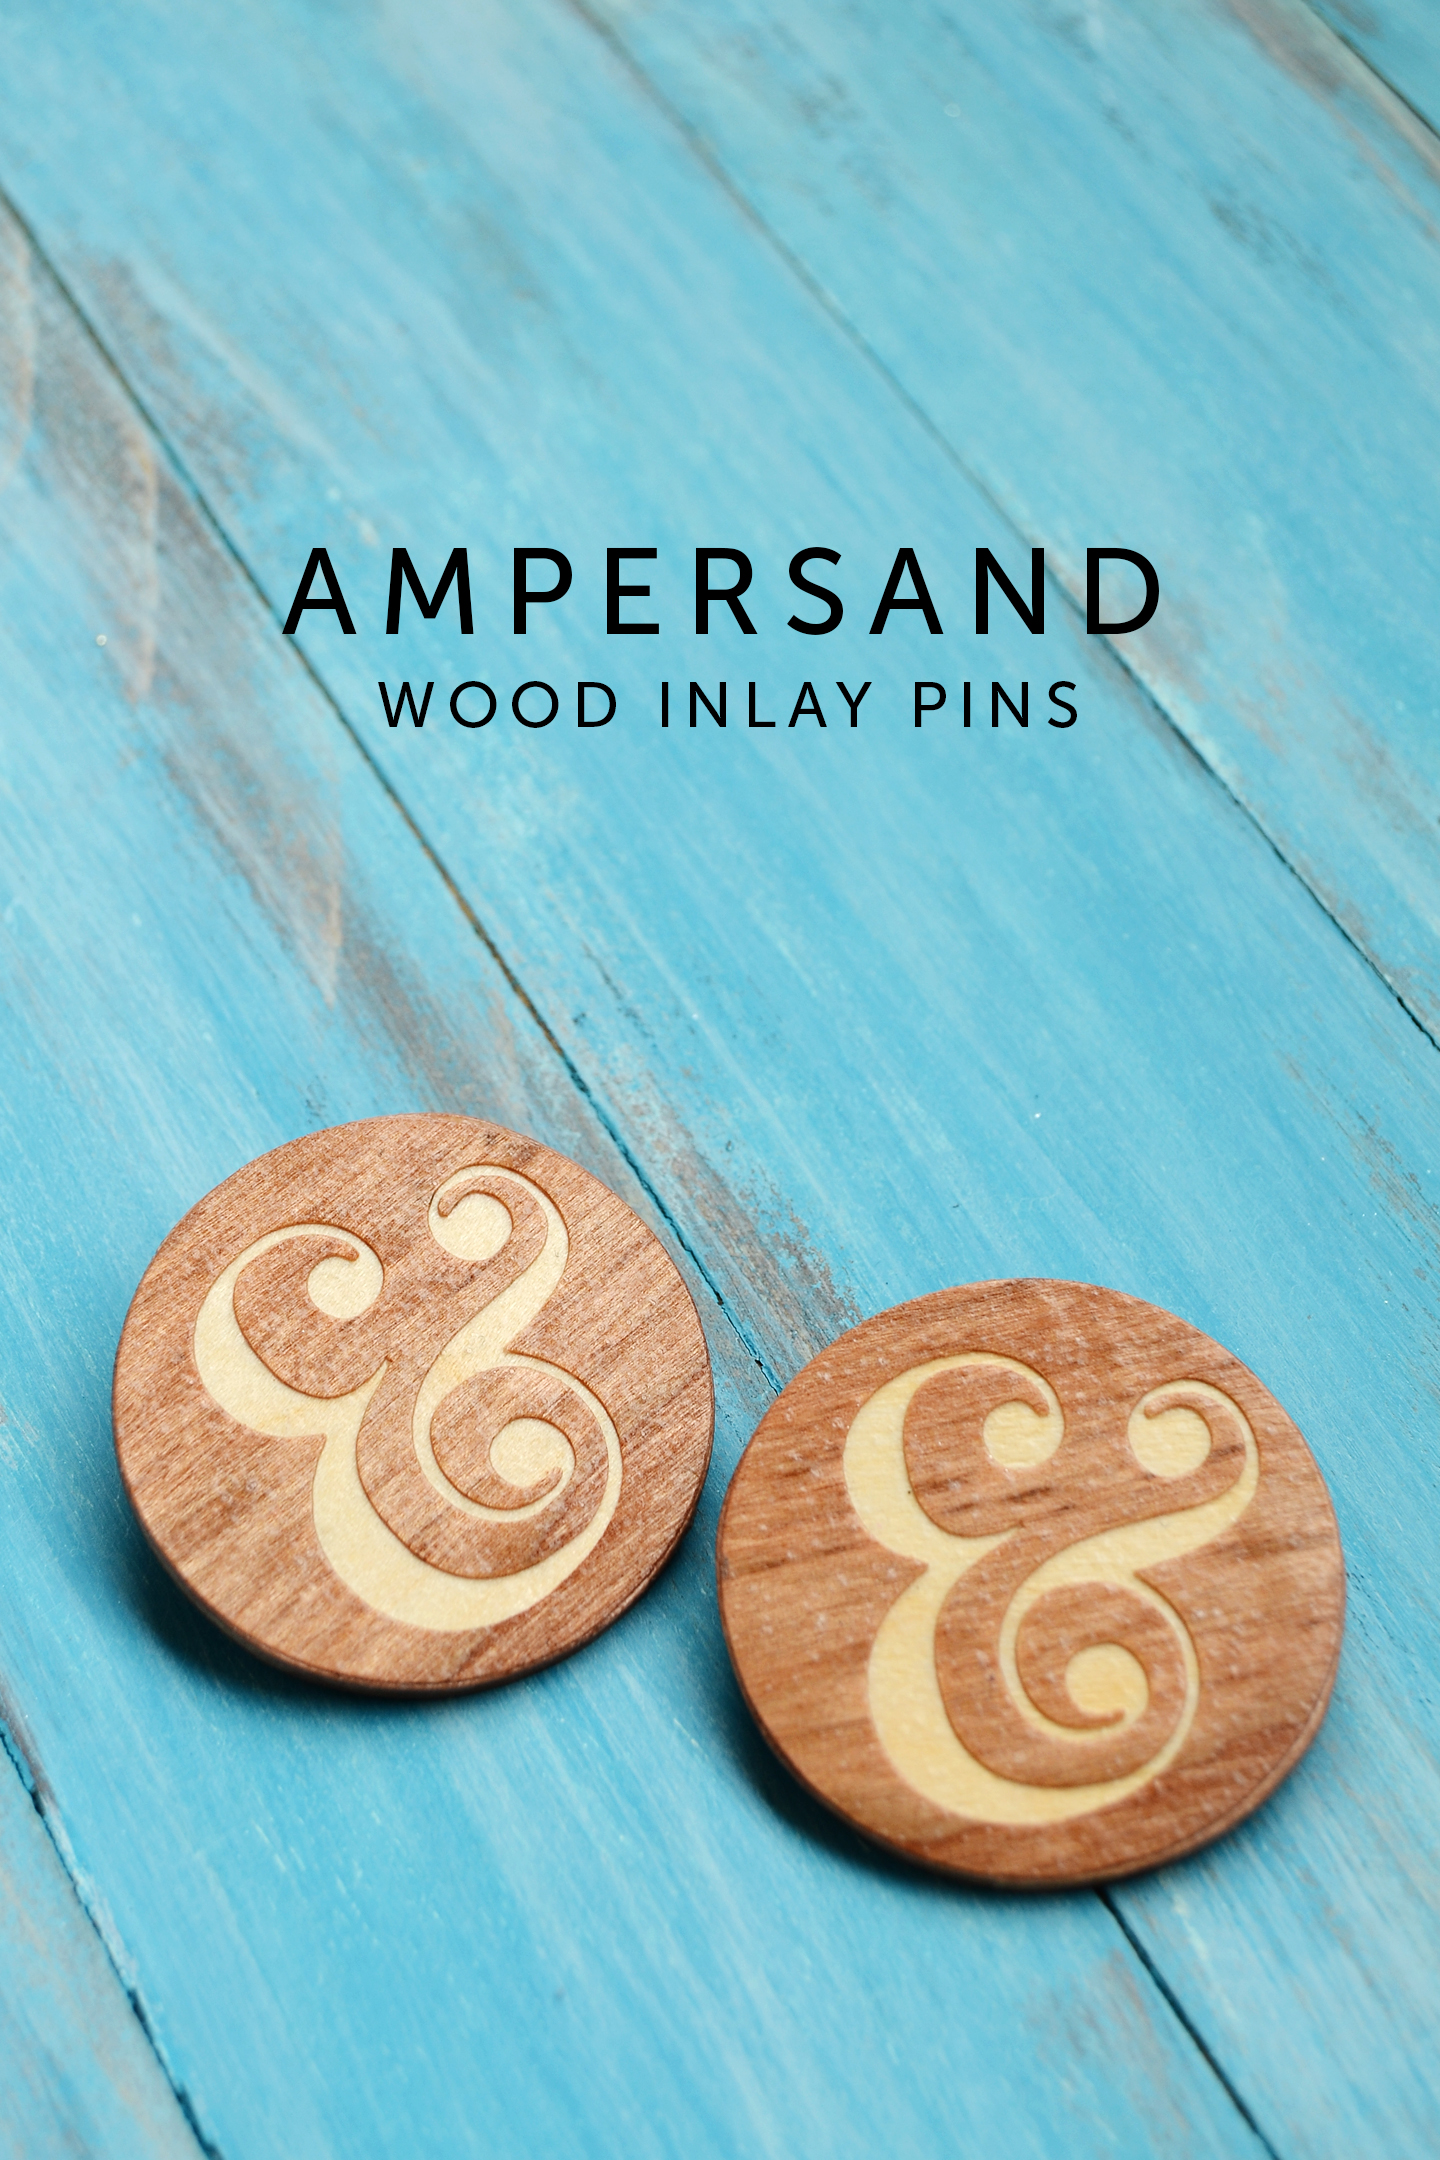 These cool DIY pins feature the almighty ampersand. You're going to love the wood inlay effect - and you can customize any way you like!